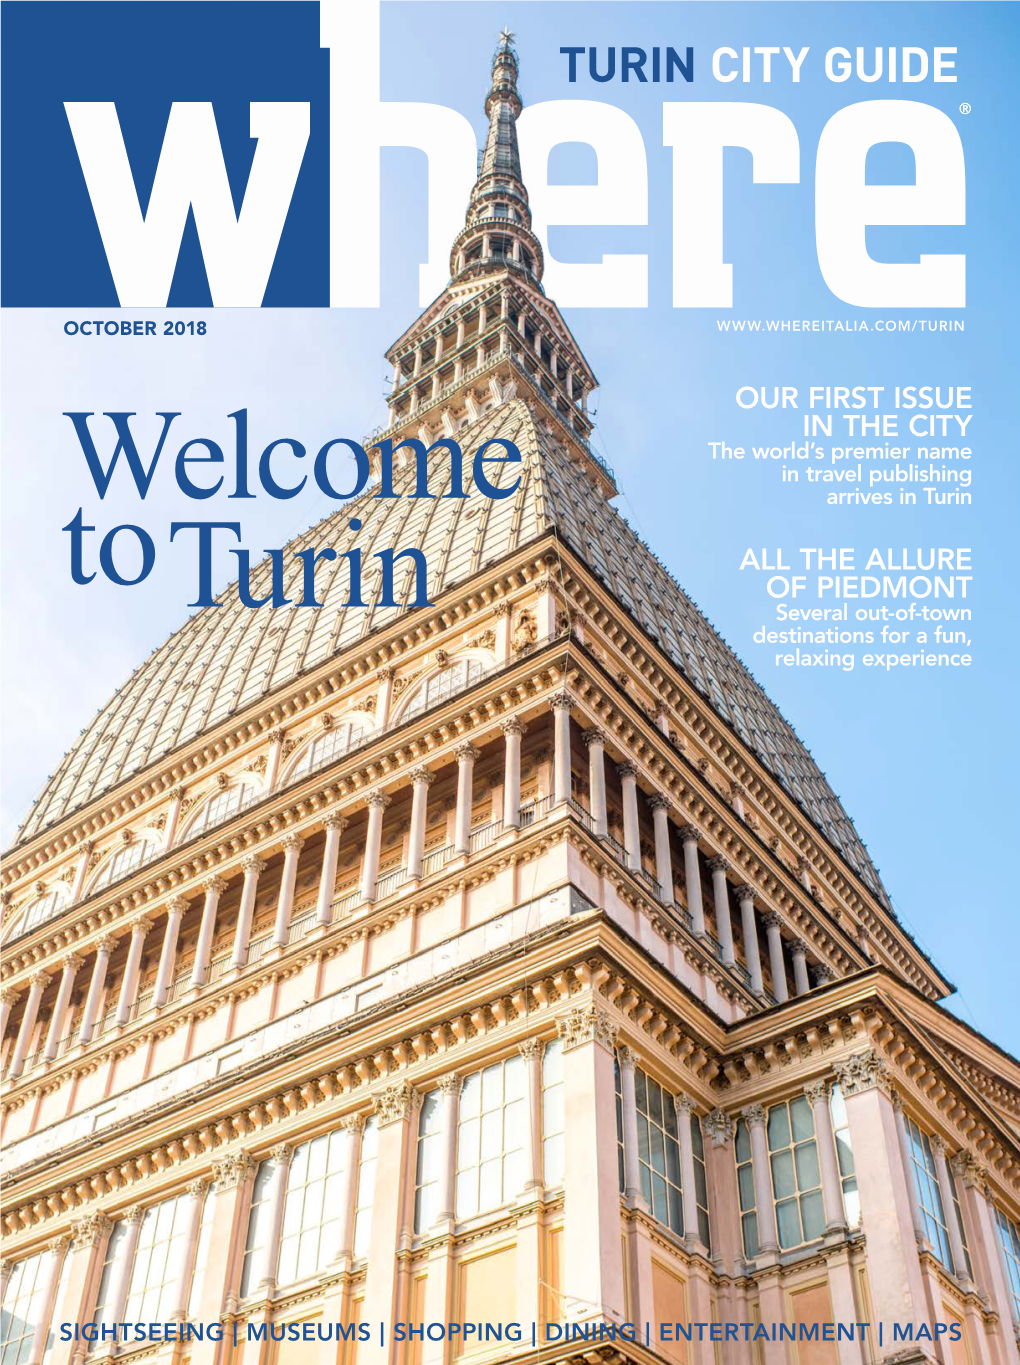 Turin City Guide ®